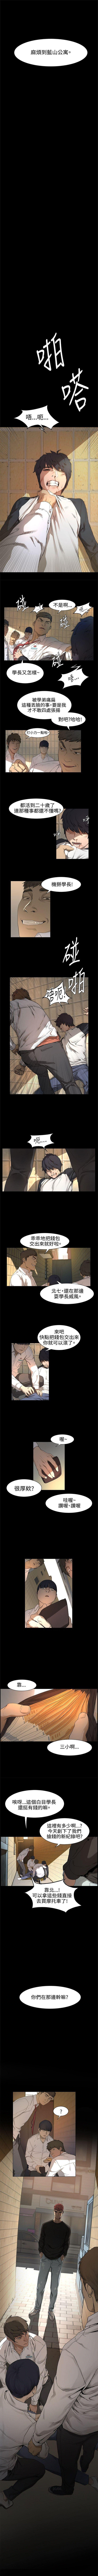 Fuck Her Hard 衝突 1-106 官方中文（連載中） Boys - Page 5